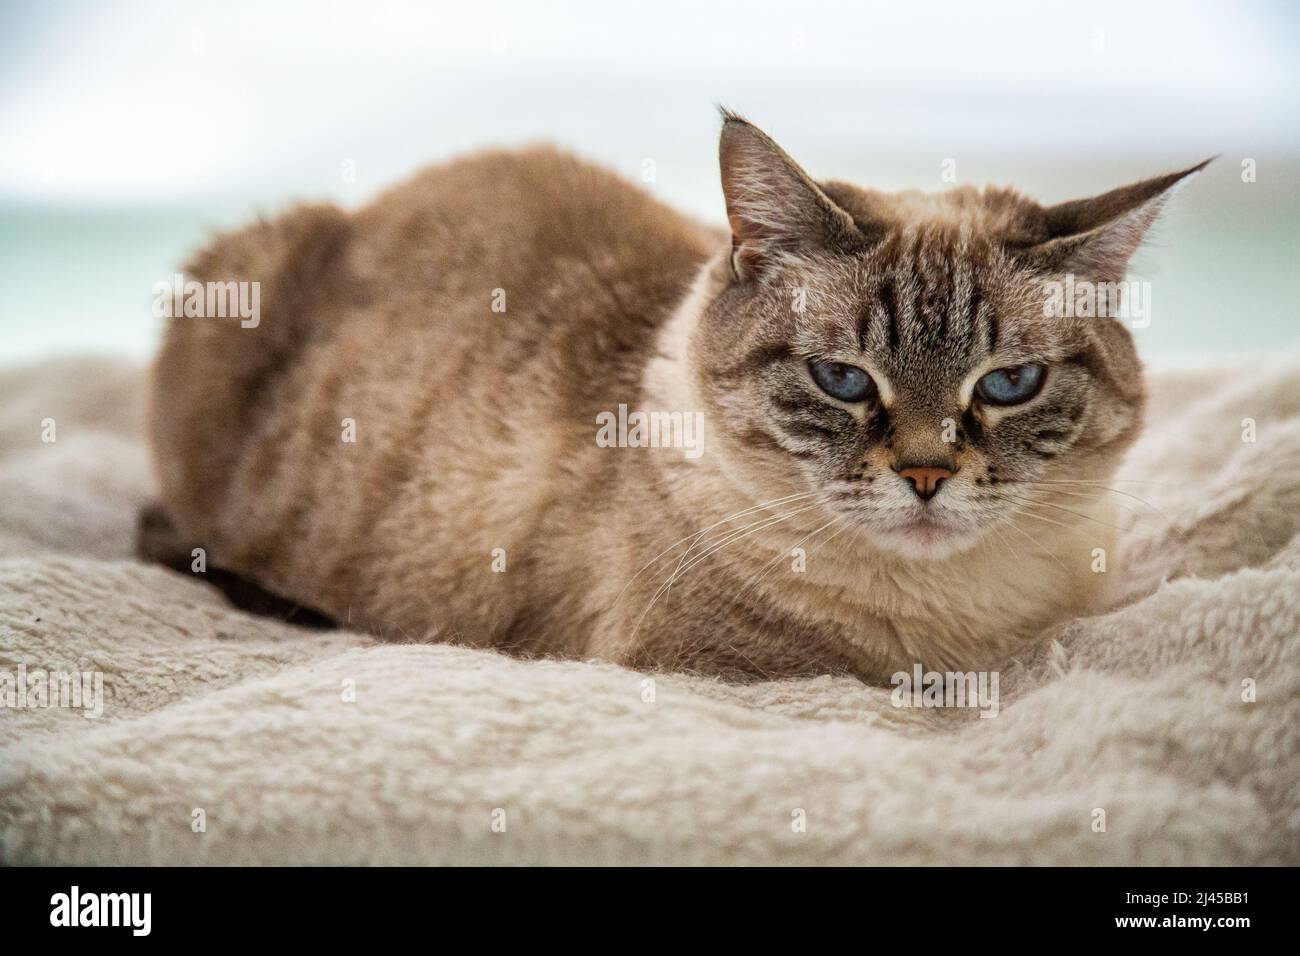 portrait of a pet, Thai cat with blue eyes.Thai-Siamese cat curled up on her favorite blanket. Stock Photo